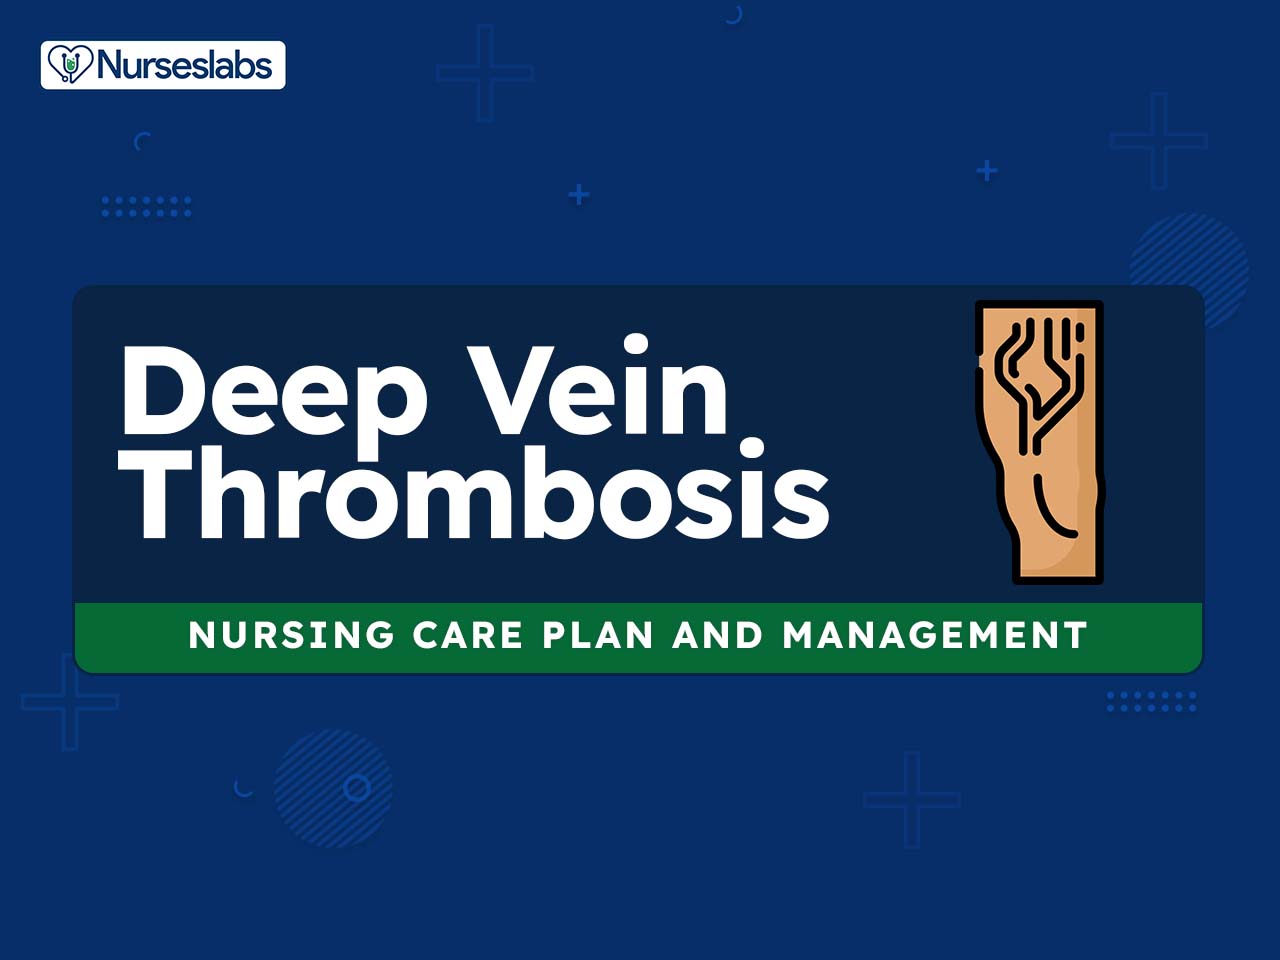 Post-Thrombotic Syndrome: When Deep Vein Thrombosis Causes Long